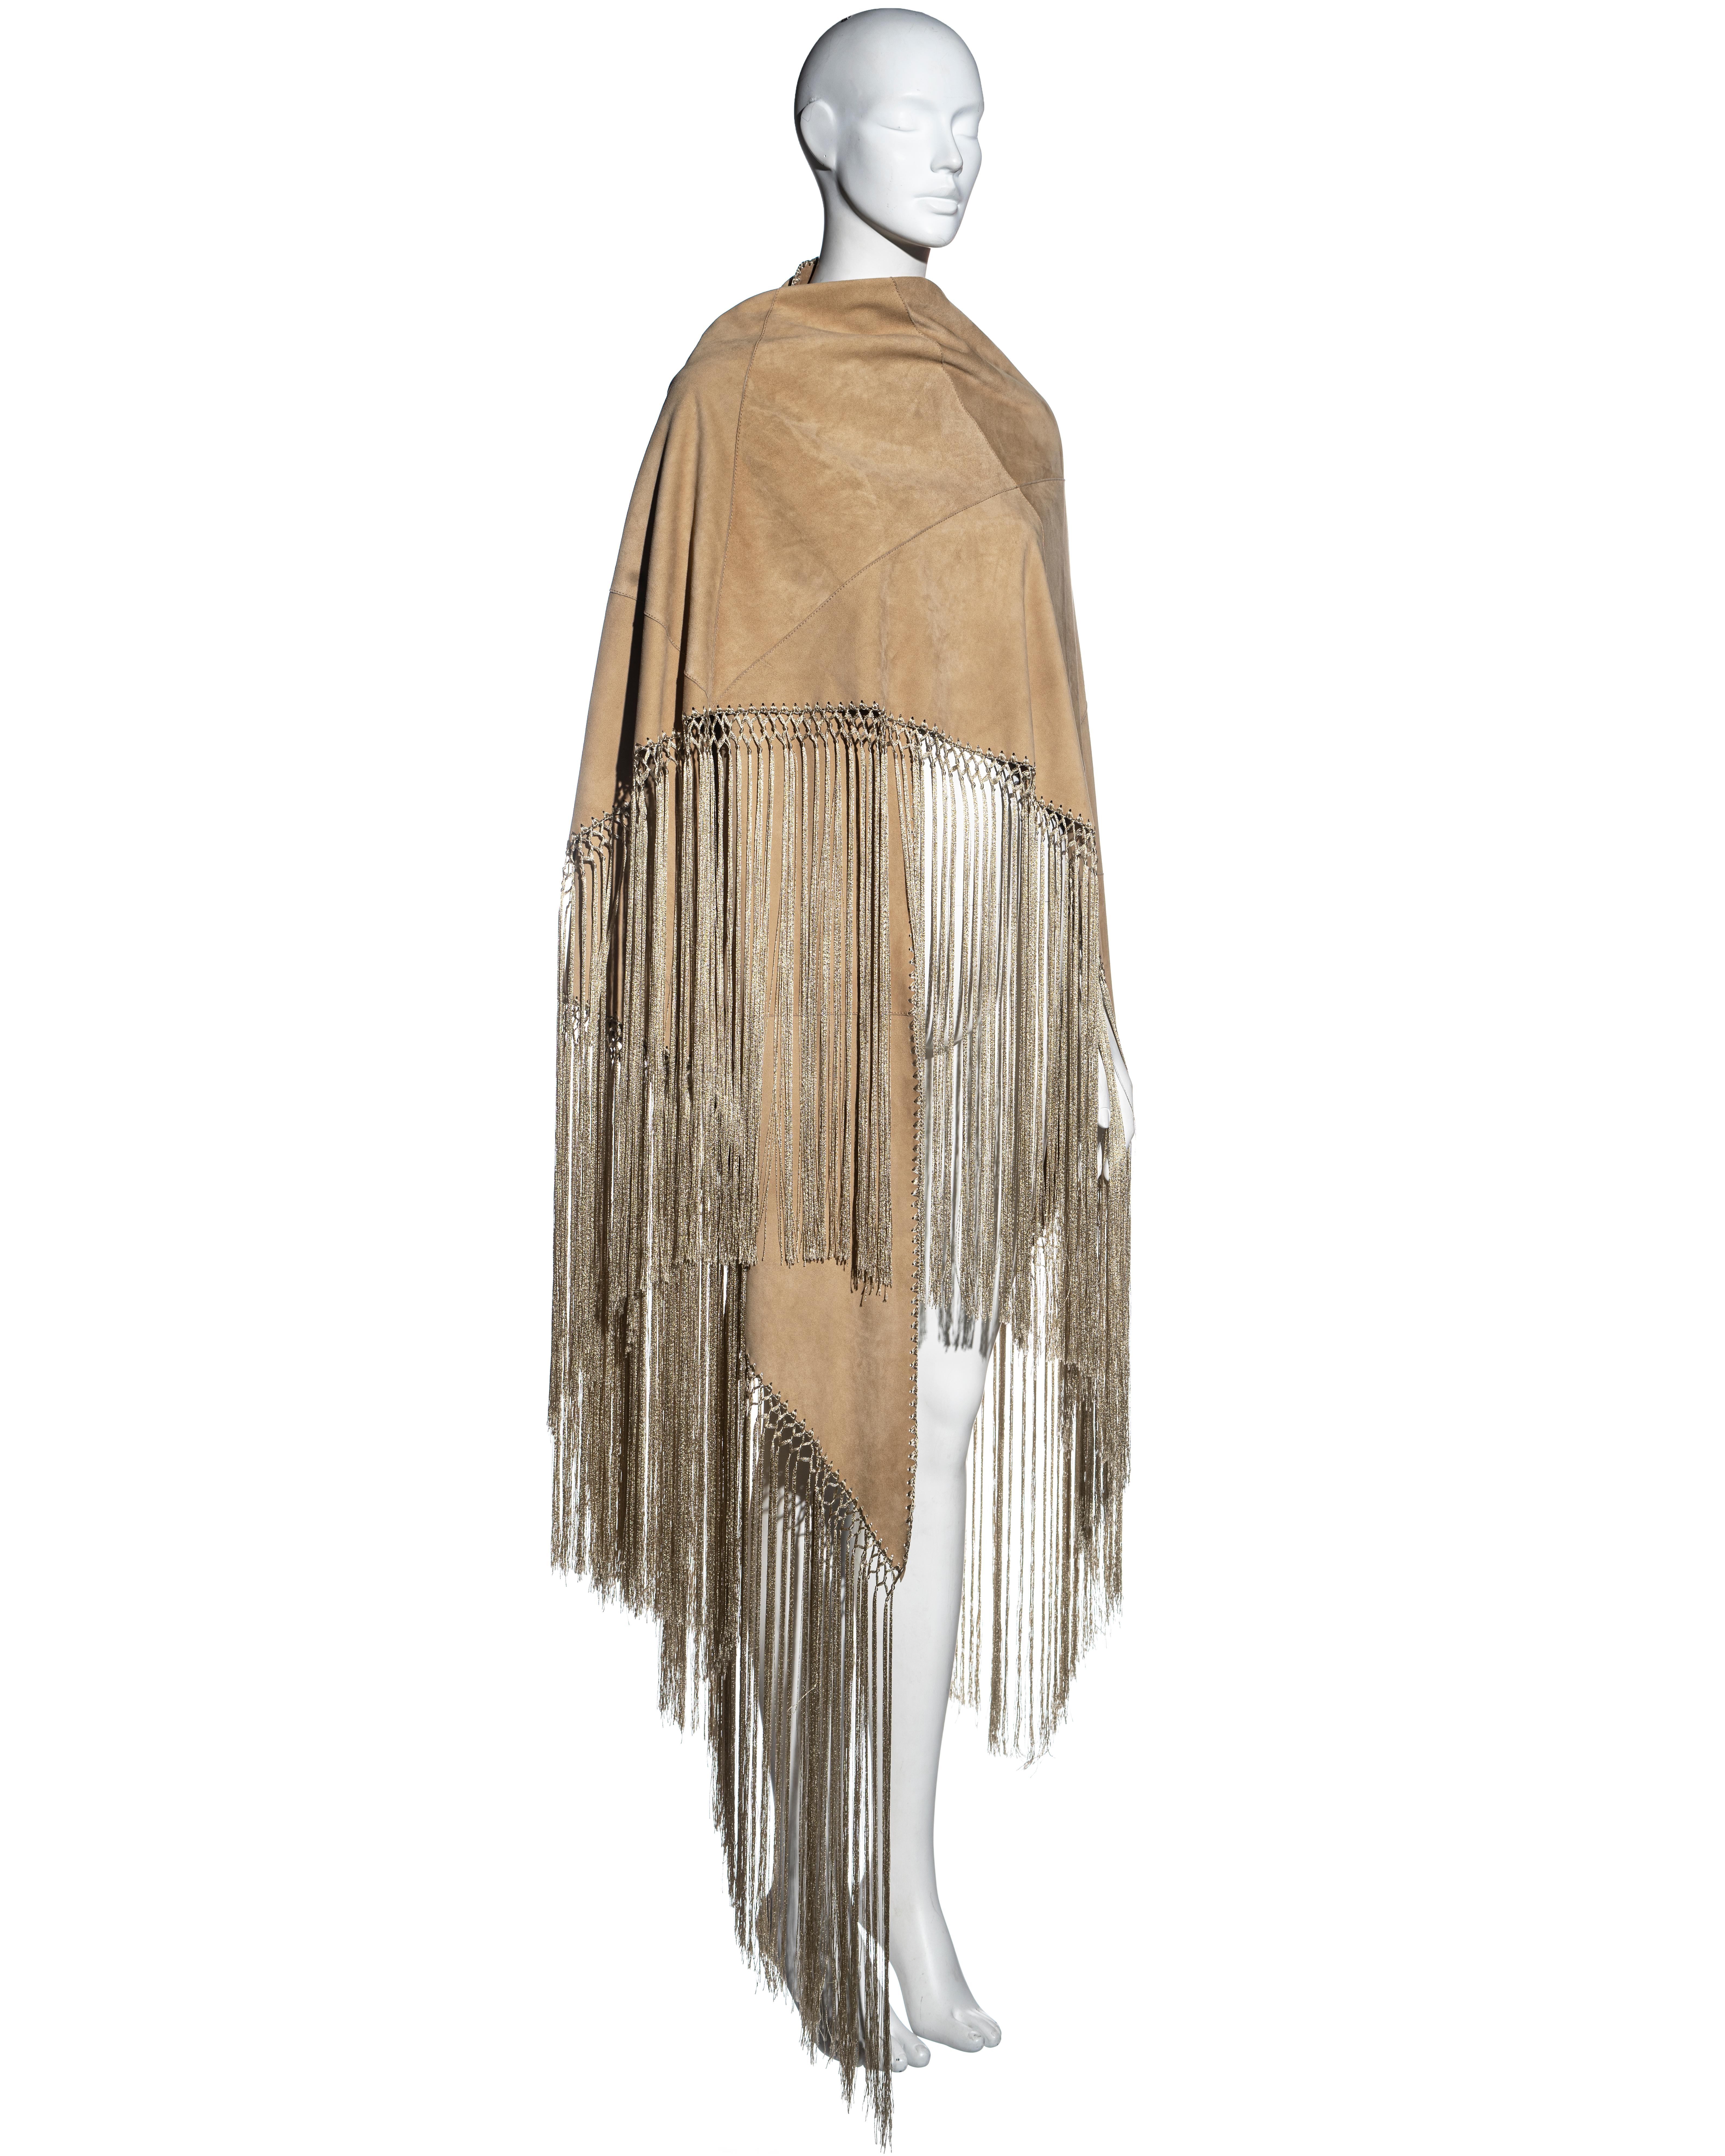 ▪ Dolce & Gabbana cream suede shawl 
▪ Silk thread deep fringe 
▪ Oversized 
▪ Can be styled in multiple ways 
▪ One size fits all
▪ Fall-Winter 2002